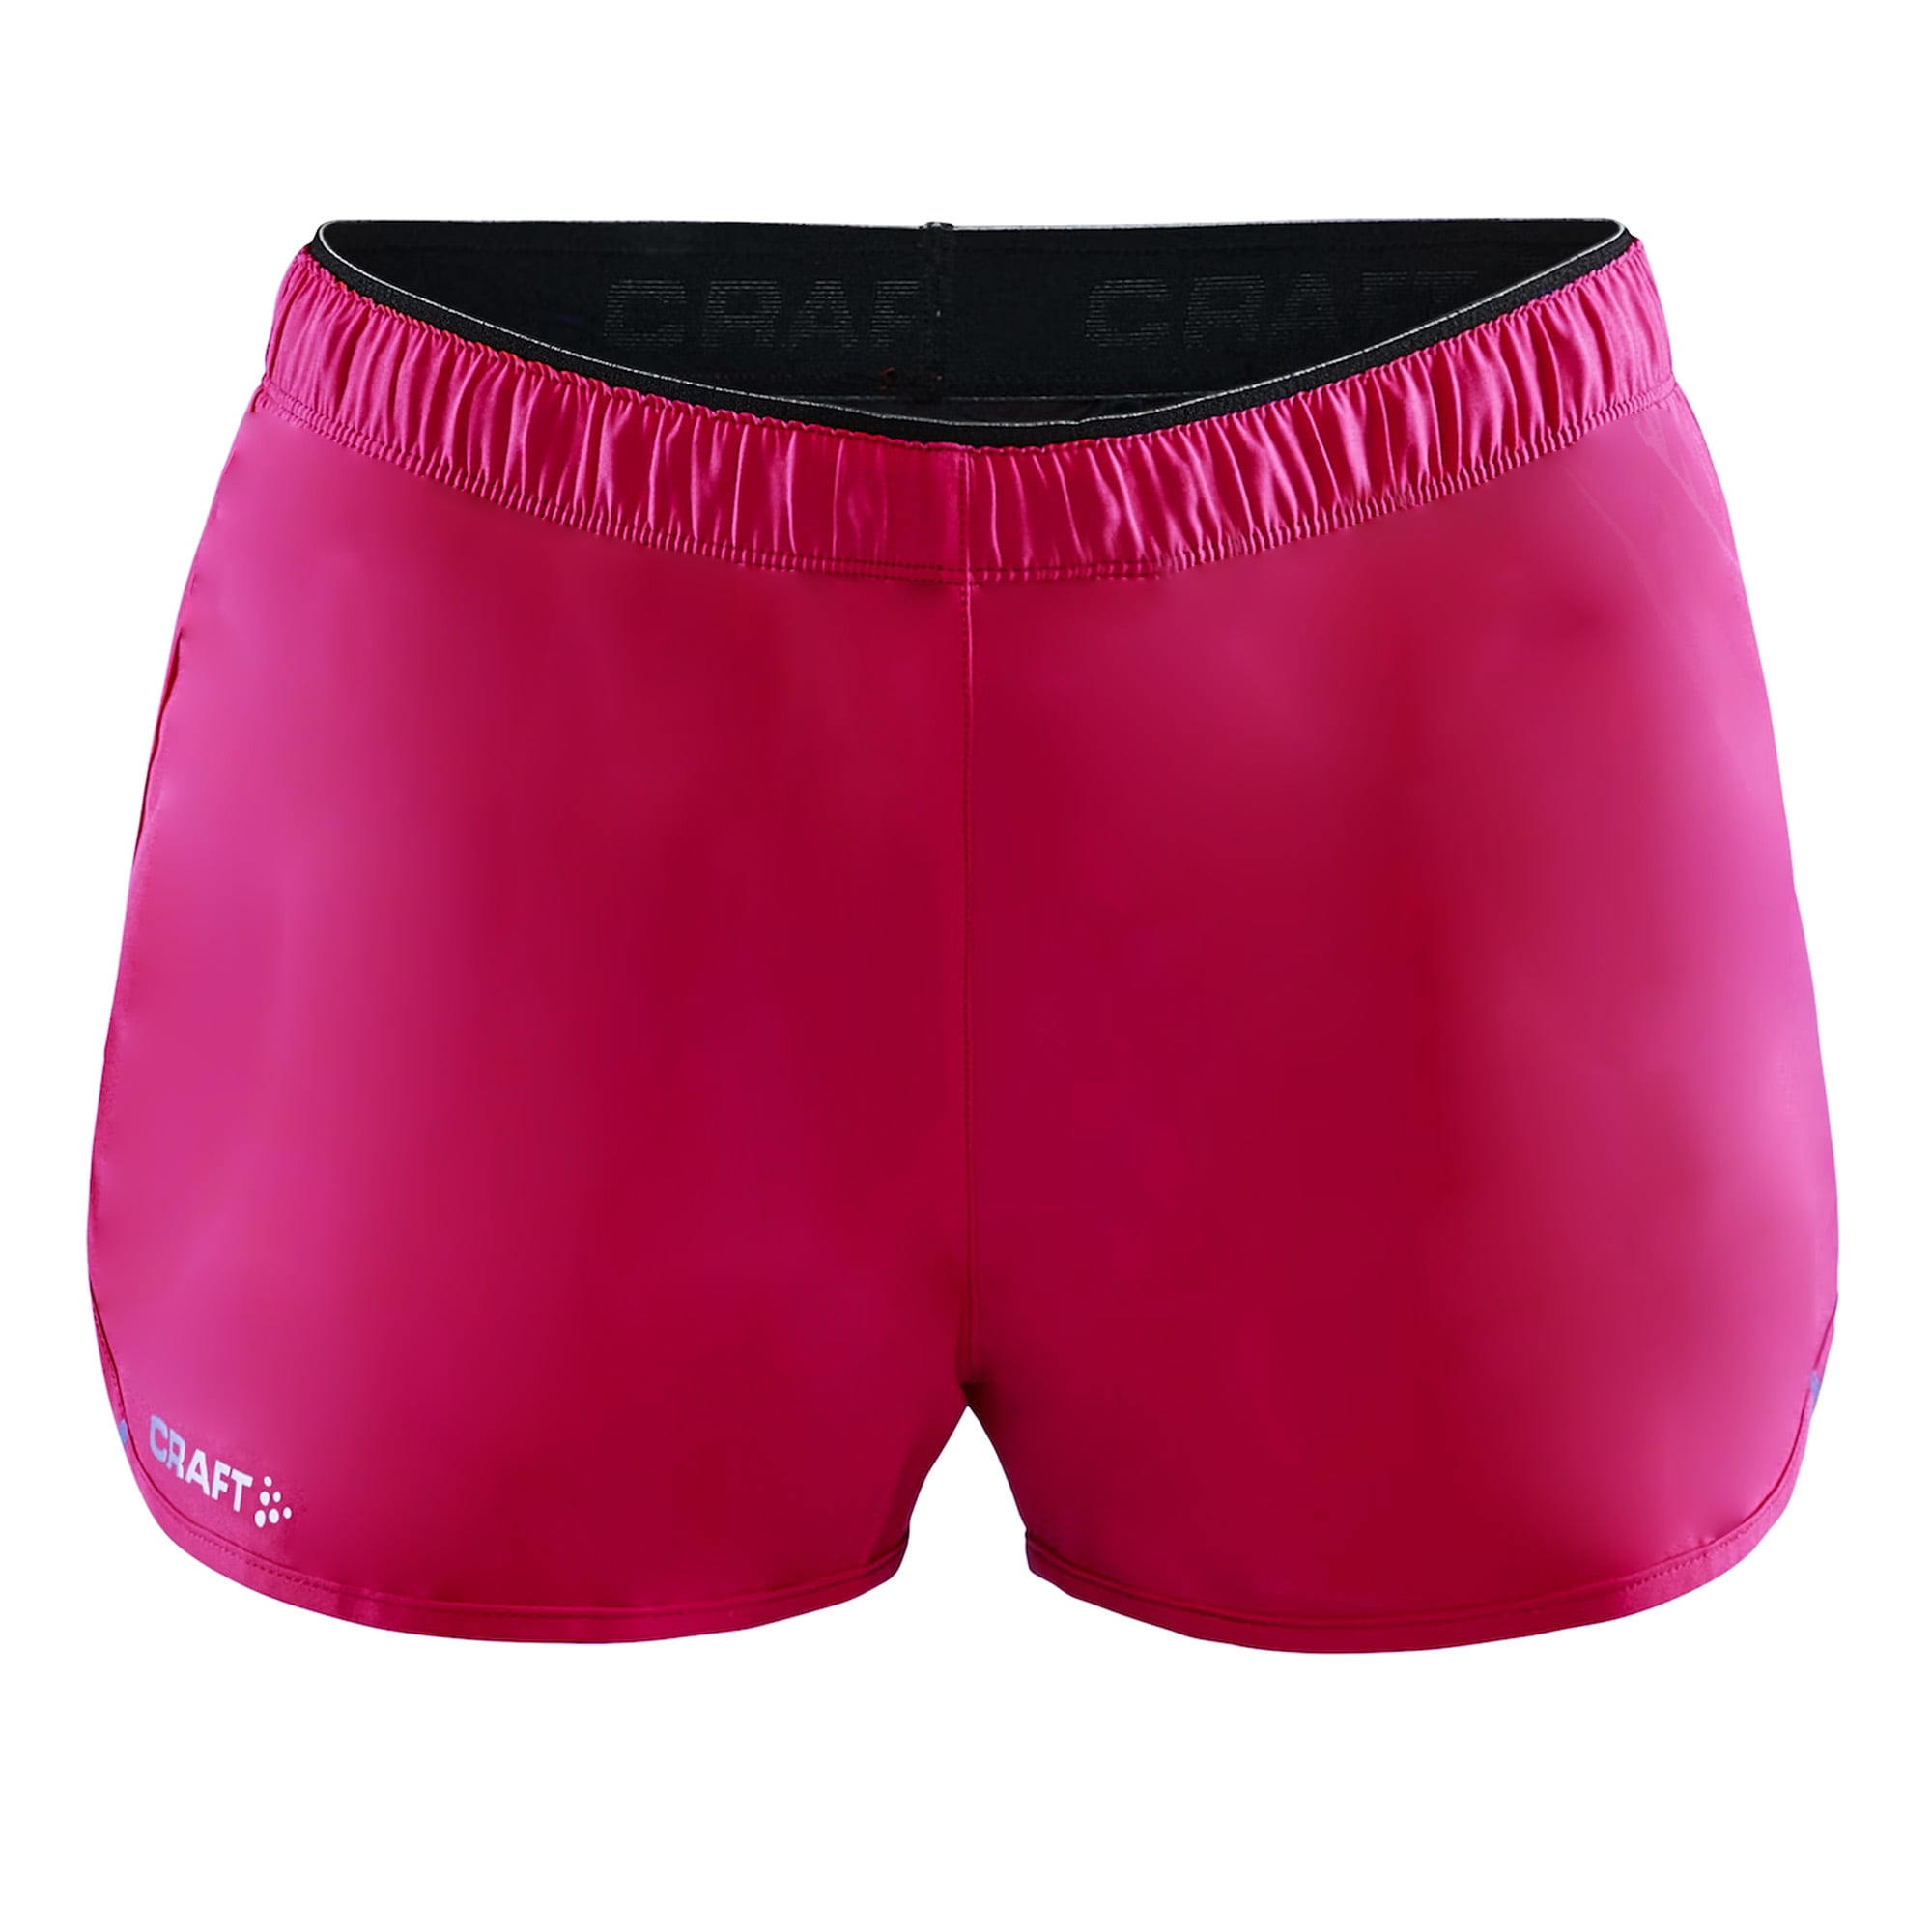 Craft Sportswear Women's ADV Essence 2-in-1 Shorts, Dawn, X-Small at   Women's Clothing store